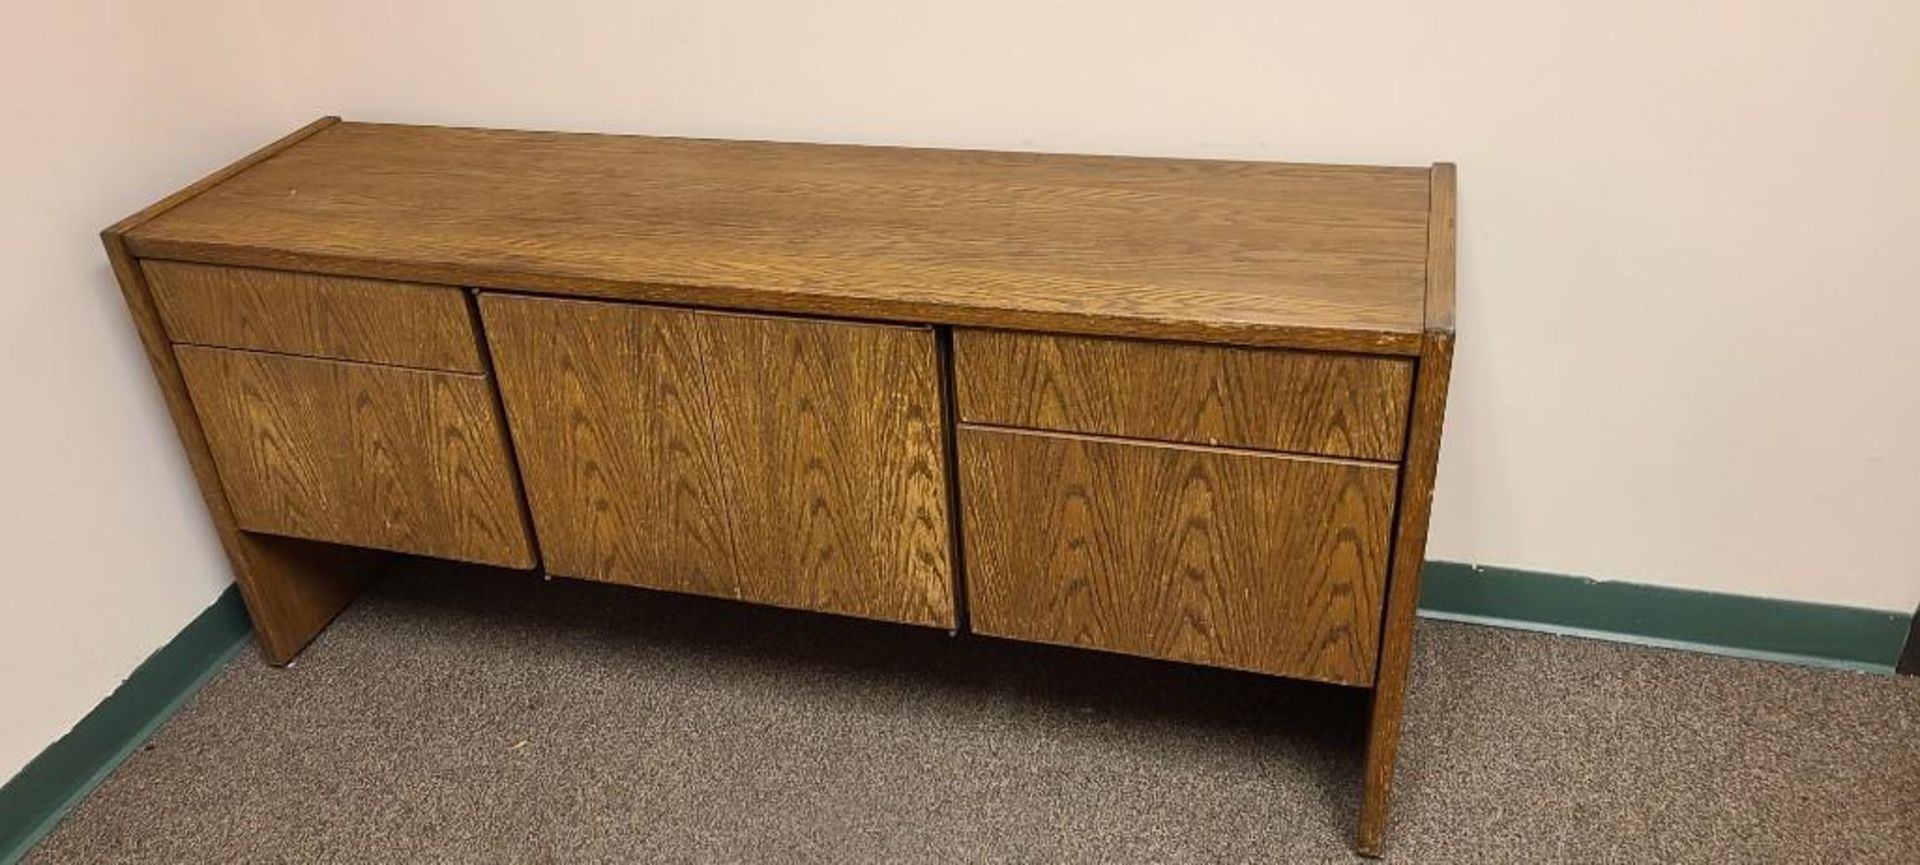 WOOD CORNER DESK 6'X5'X30", OFFICE TABLE WITH HANGING FILE DRAWERS, SOYO MONITOR - Image 2 of 3